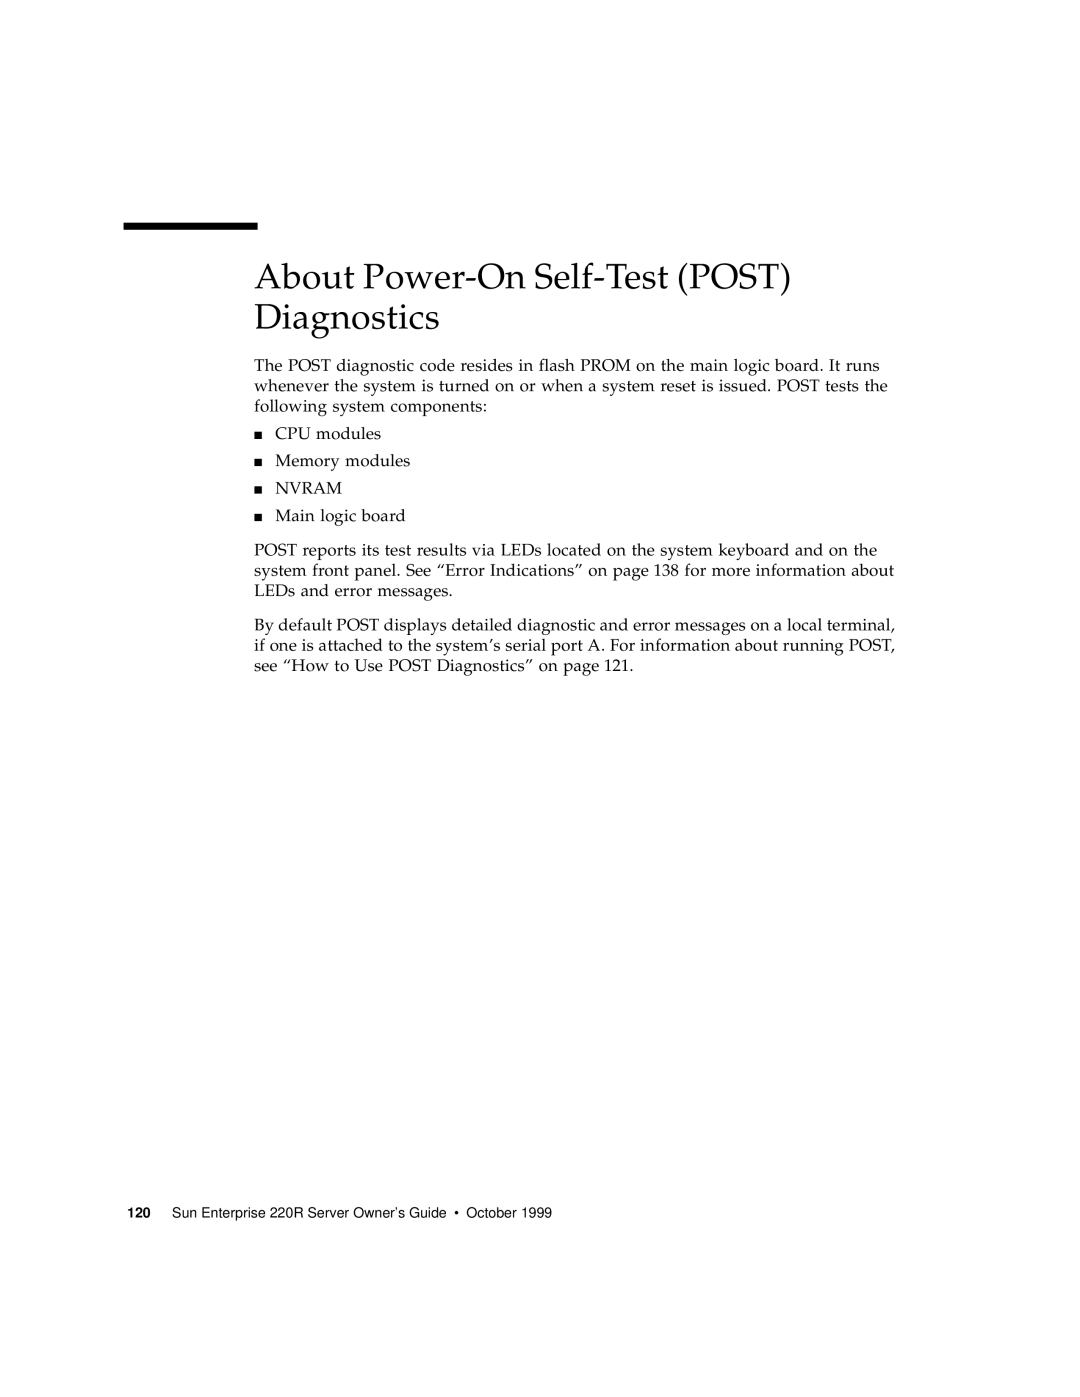 Sun Microsystems 220R manual About Power-On Self-Test POST Diagnostics 